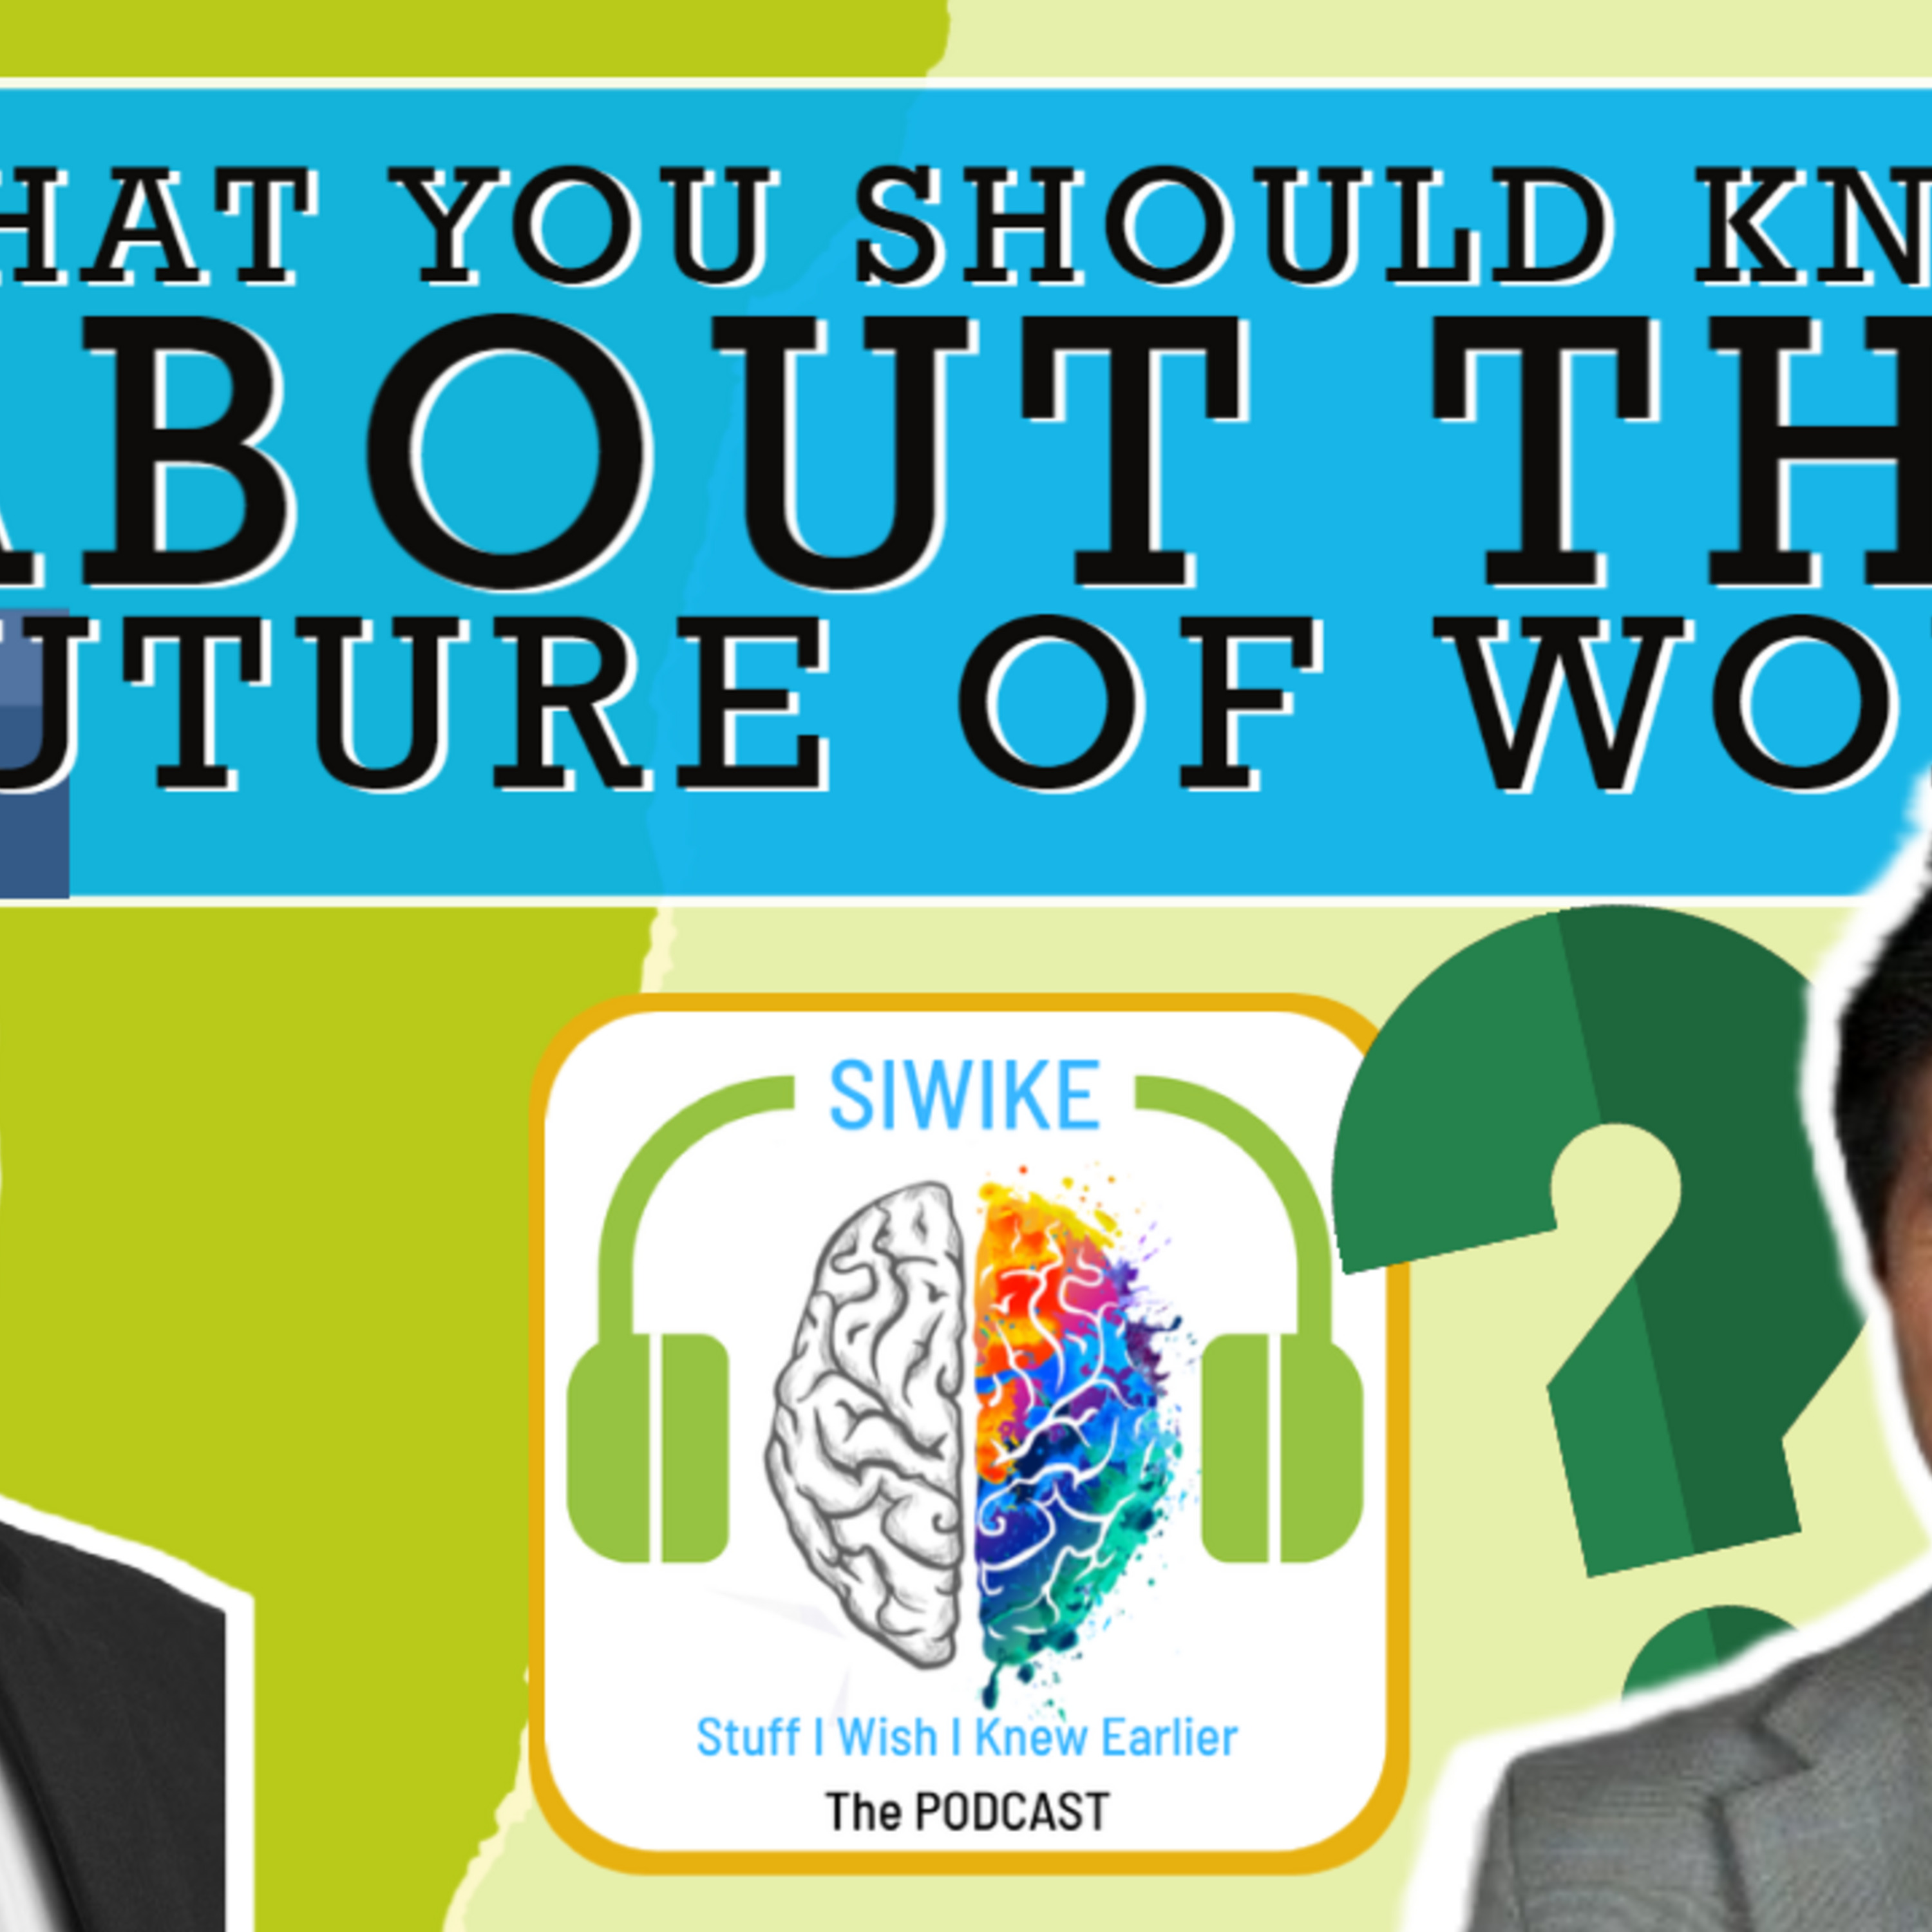 What you should know about the future of work - Brian Lau BL-002 podcast